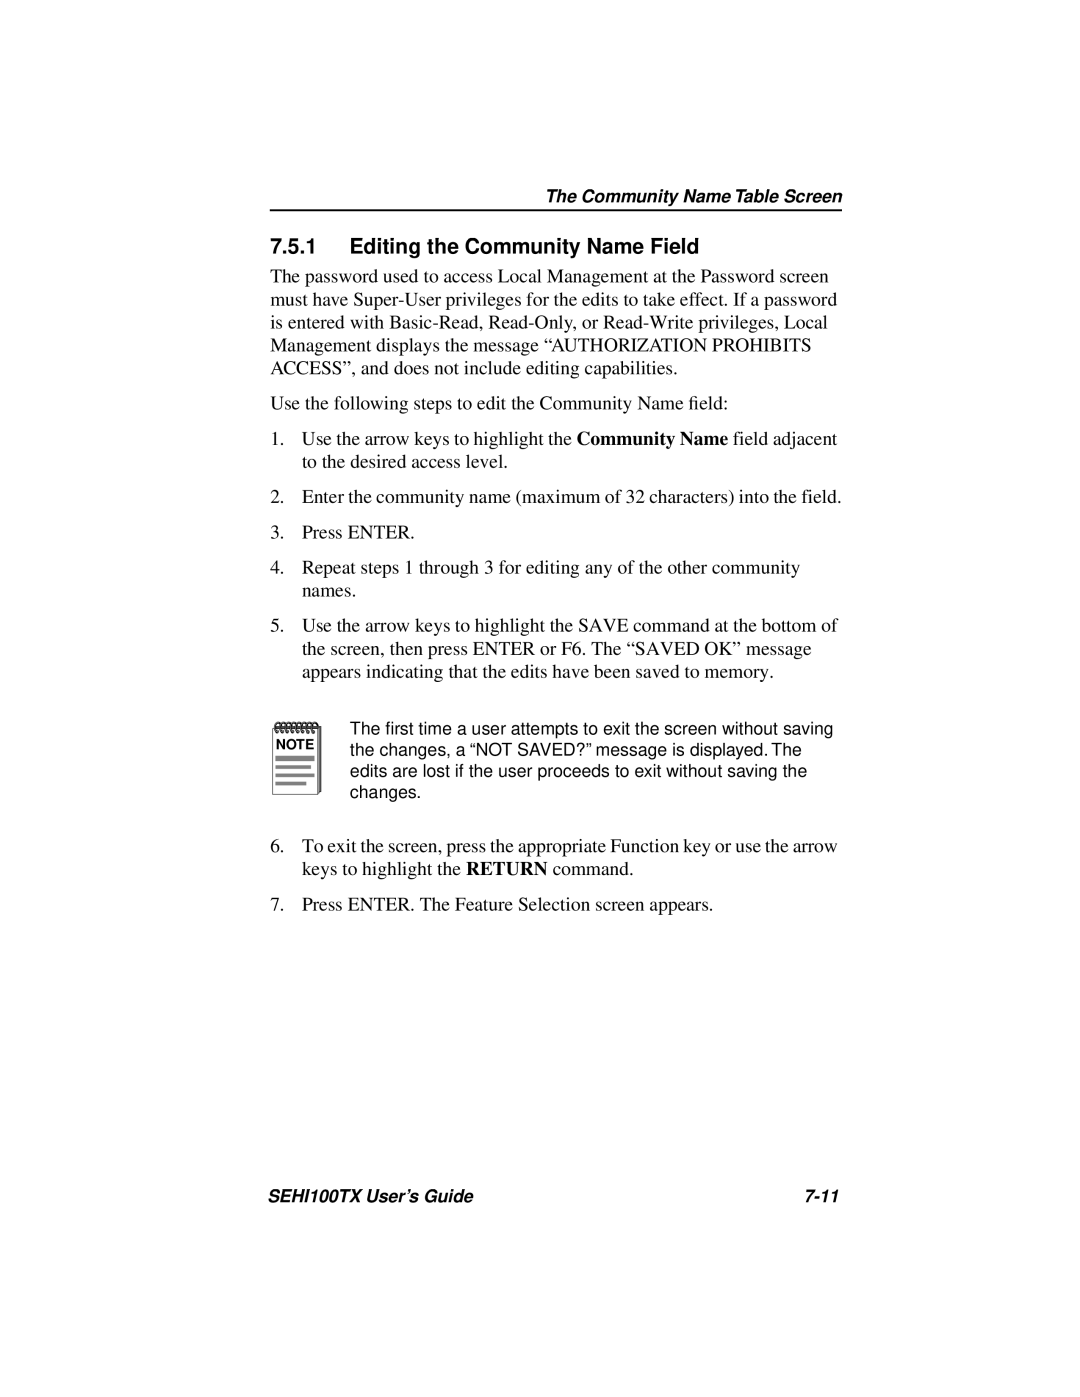 Cabletron Systems SEHI100TX-22 manual Editing the Community Name Field 